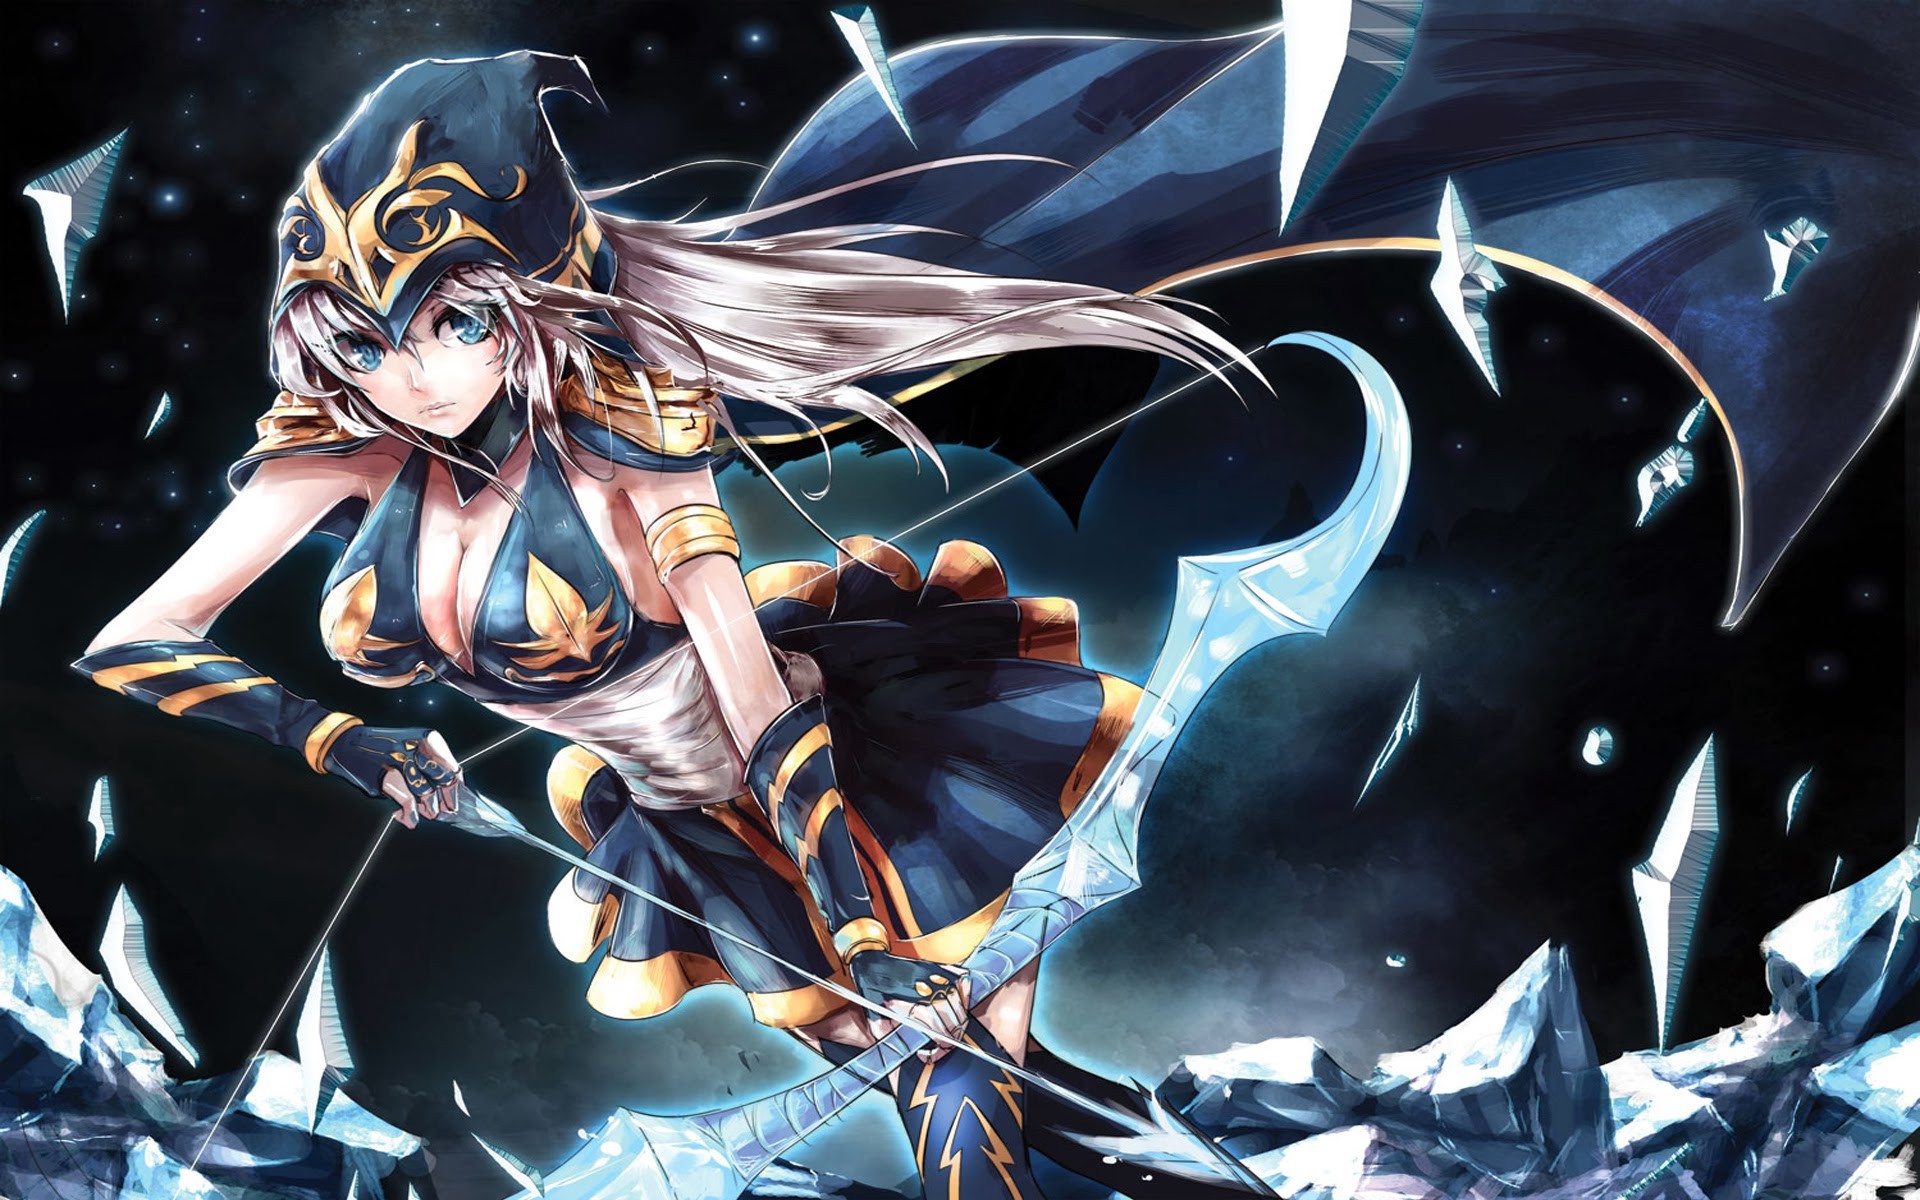 Anime 1920x1200 League of Legends video games archer PC gaming video game art boobs cleavage Ashe (League of Legends) video game girls fantasy girl hoods long hair bow arrows cape blue eyes big boobs video game characters bow and arrow fantasy art